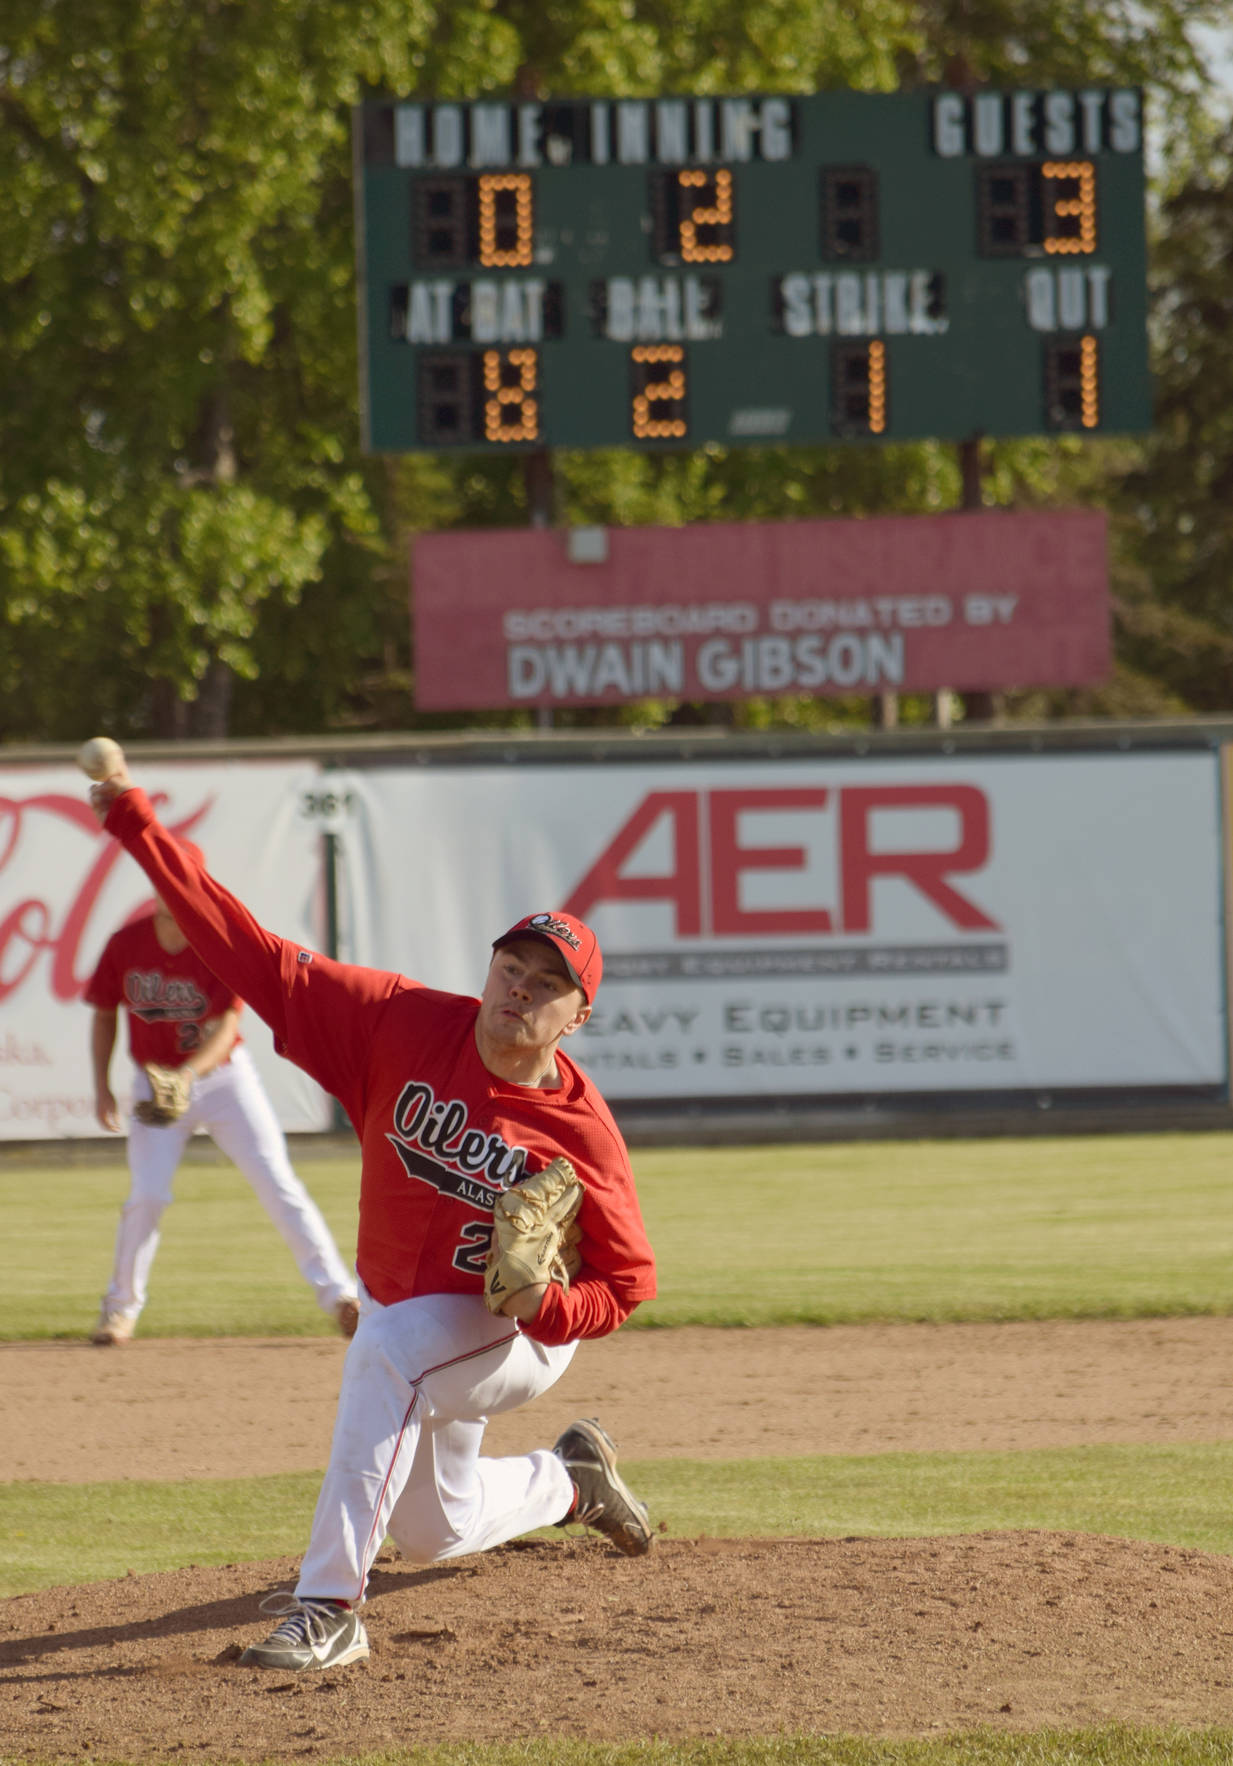 Devin Hayes delivers a pitch to the Mat-Su Miners on June 13, 2017, at Coral Seymour Memorial Park in Kenai. Behind Hayes is the scoreboard, which was in its final Oilers game after almost 40 years. (Photo by Jeff Helminiak/Peninsula Clarion)